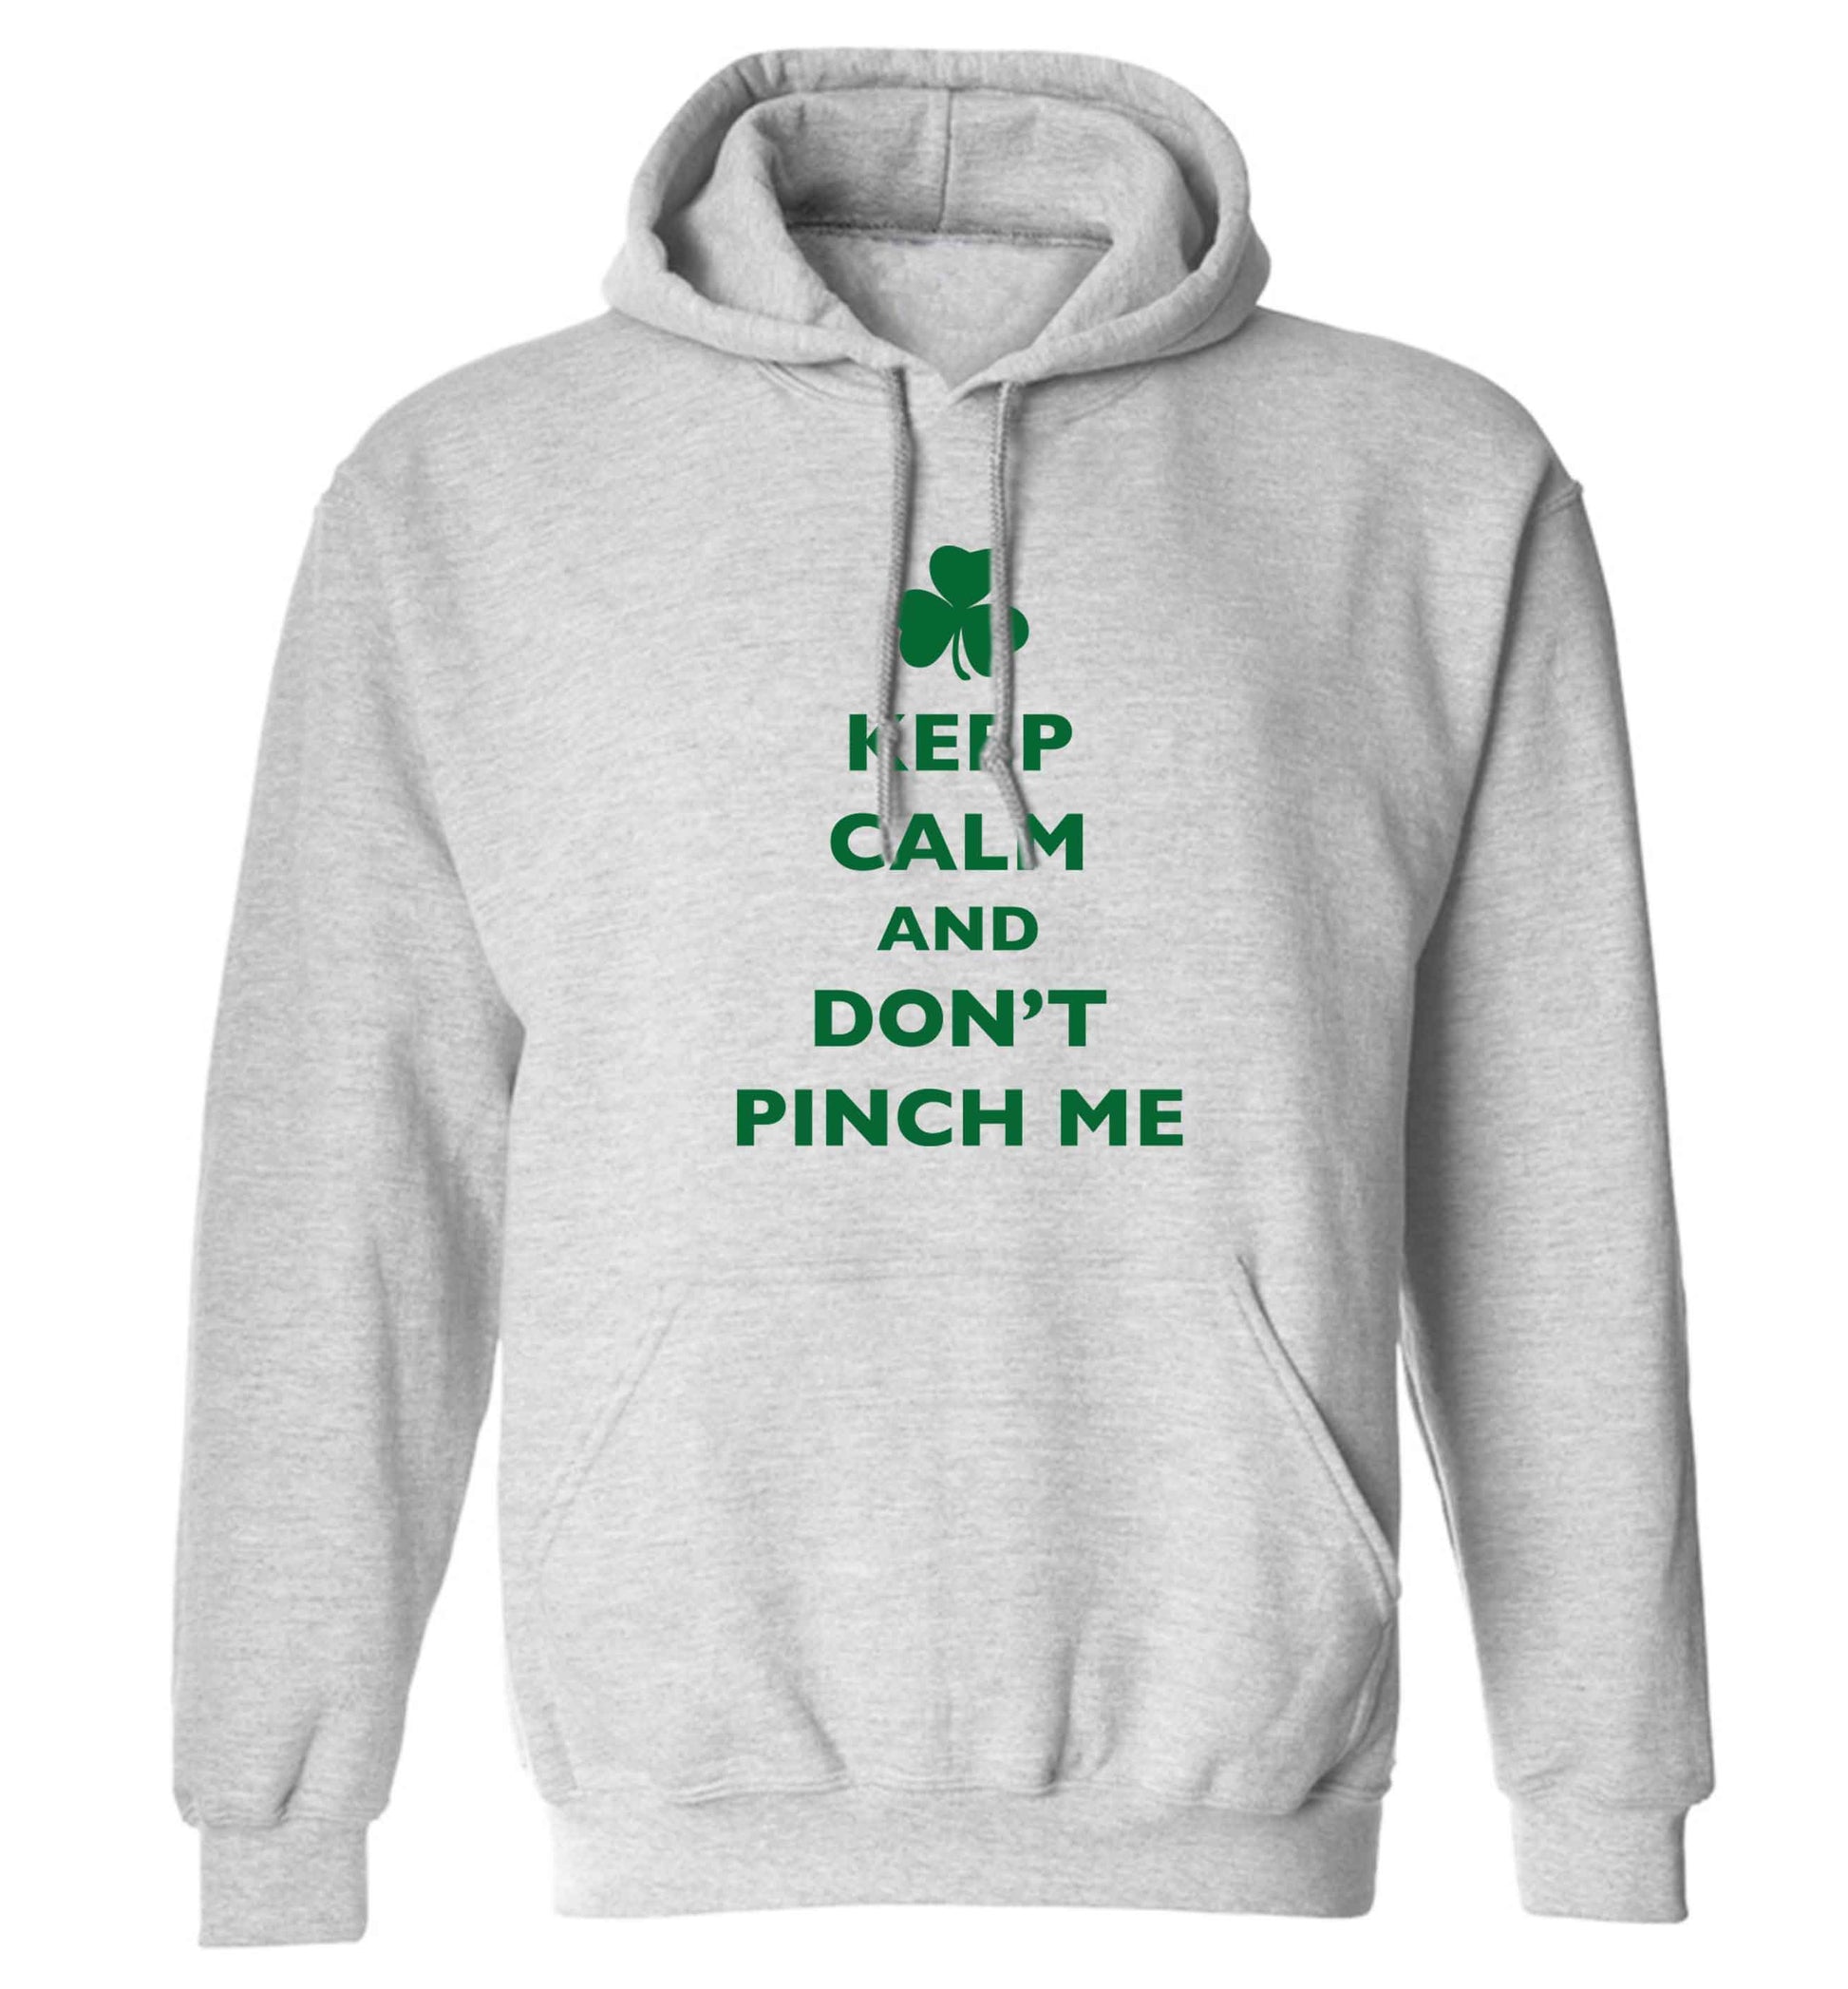 Keep calm and don't pinch me adults unisex grey hoodie 2XL